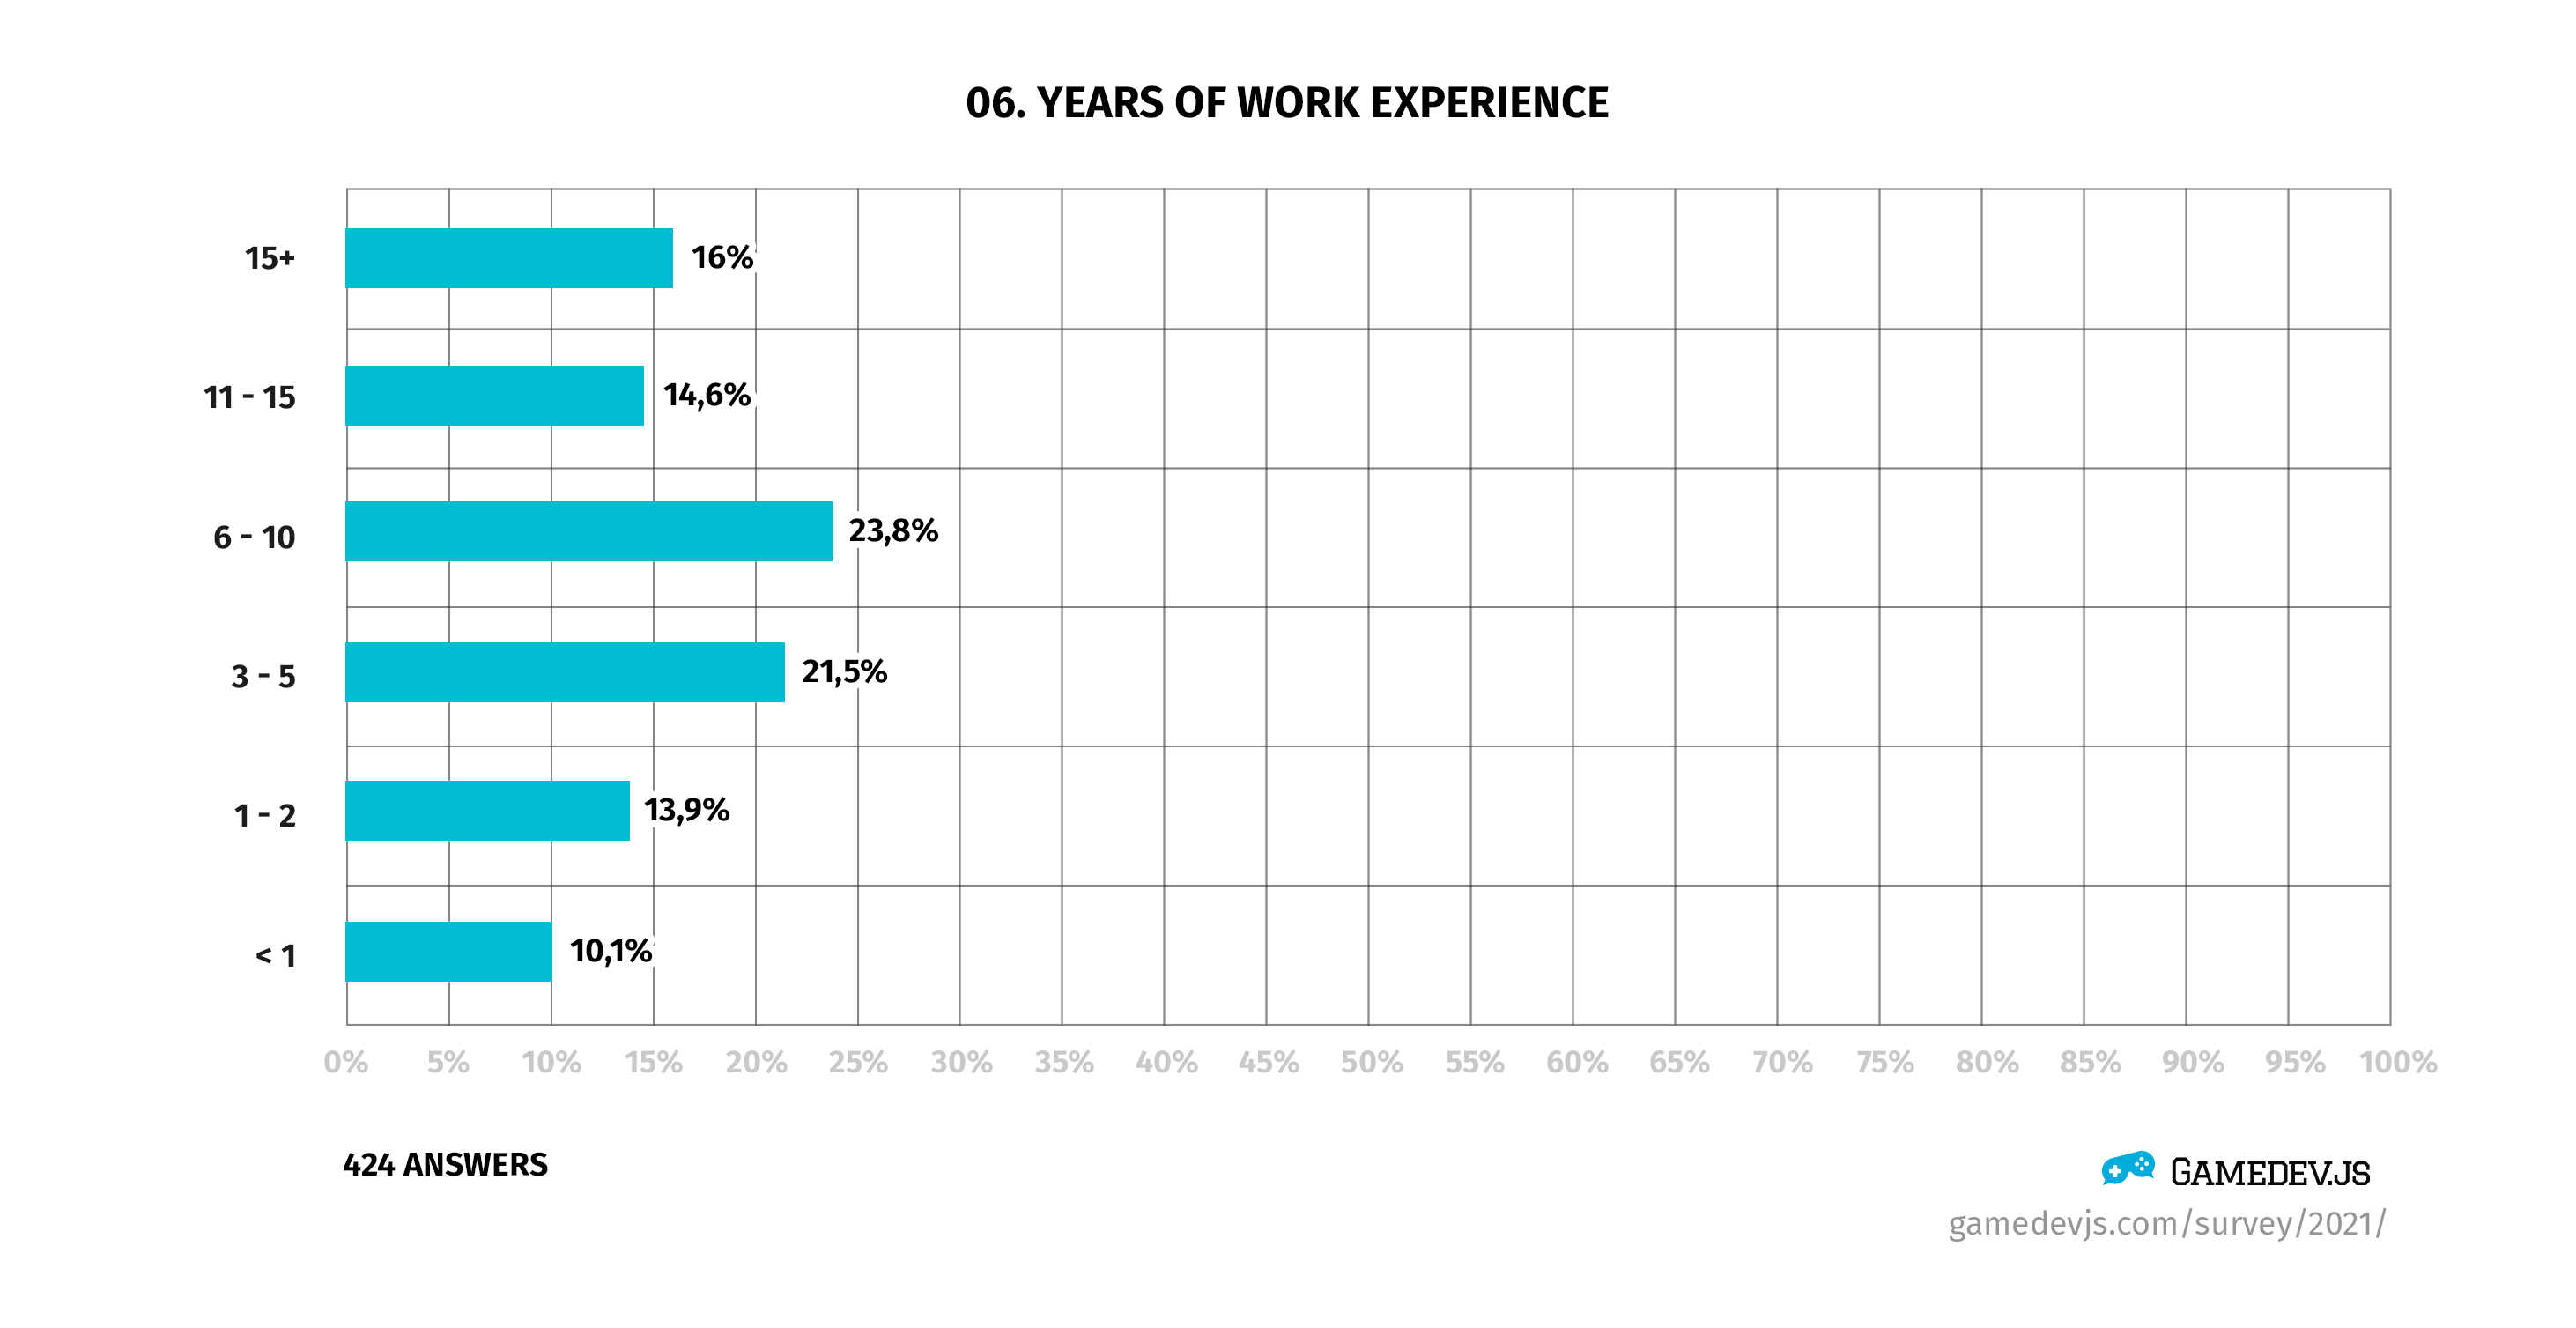 Gamedev.js Survey 2021 - Question #6: Years of work experience